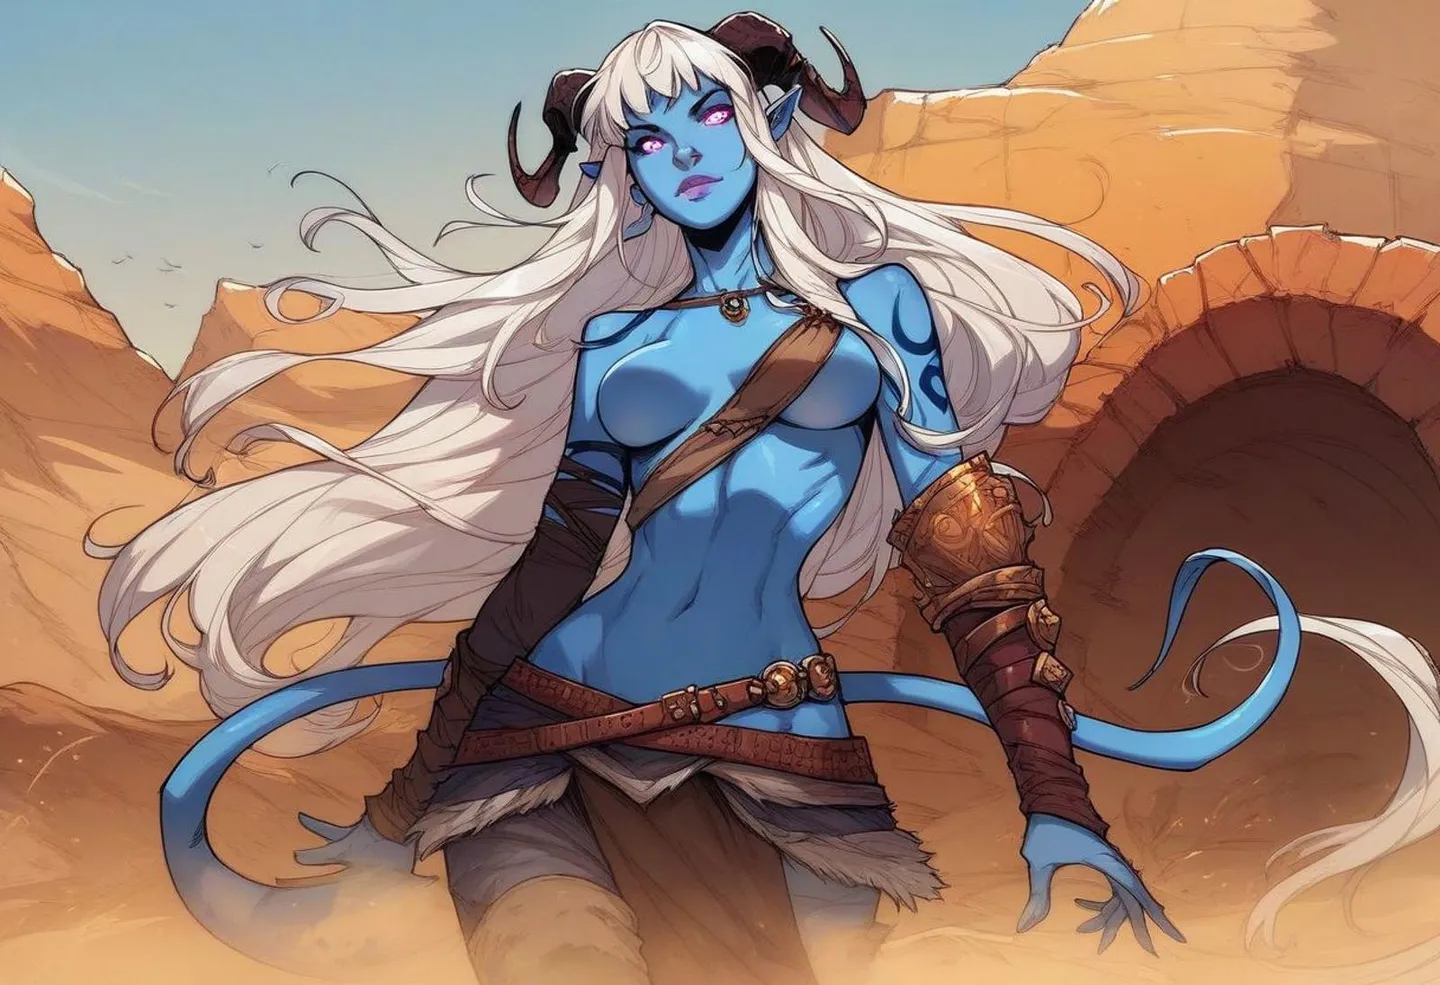 AI generated image using stable diffusion, showing a fantasy female character with blue skin and white hair in a desert landscape.